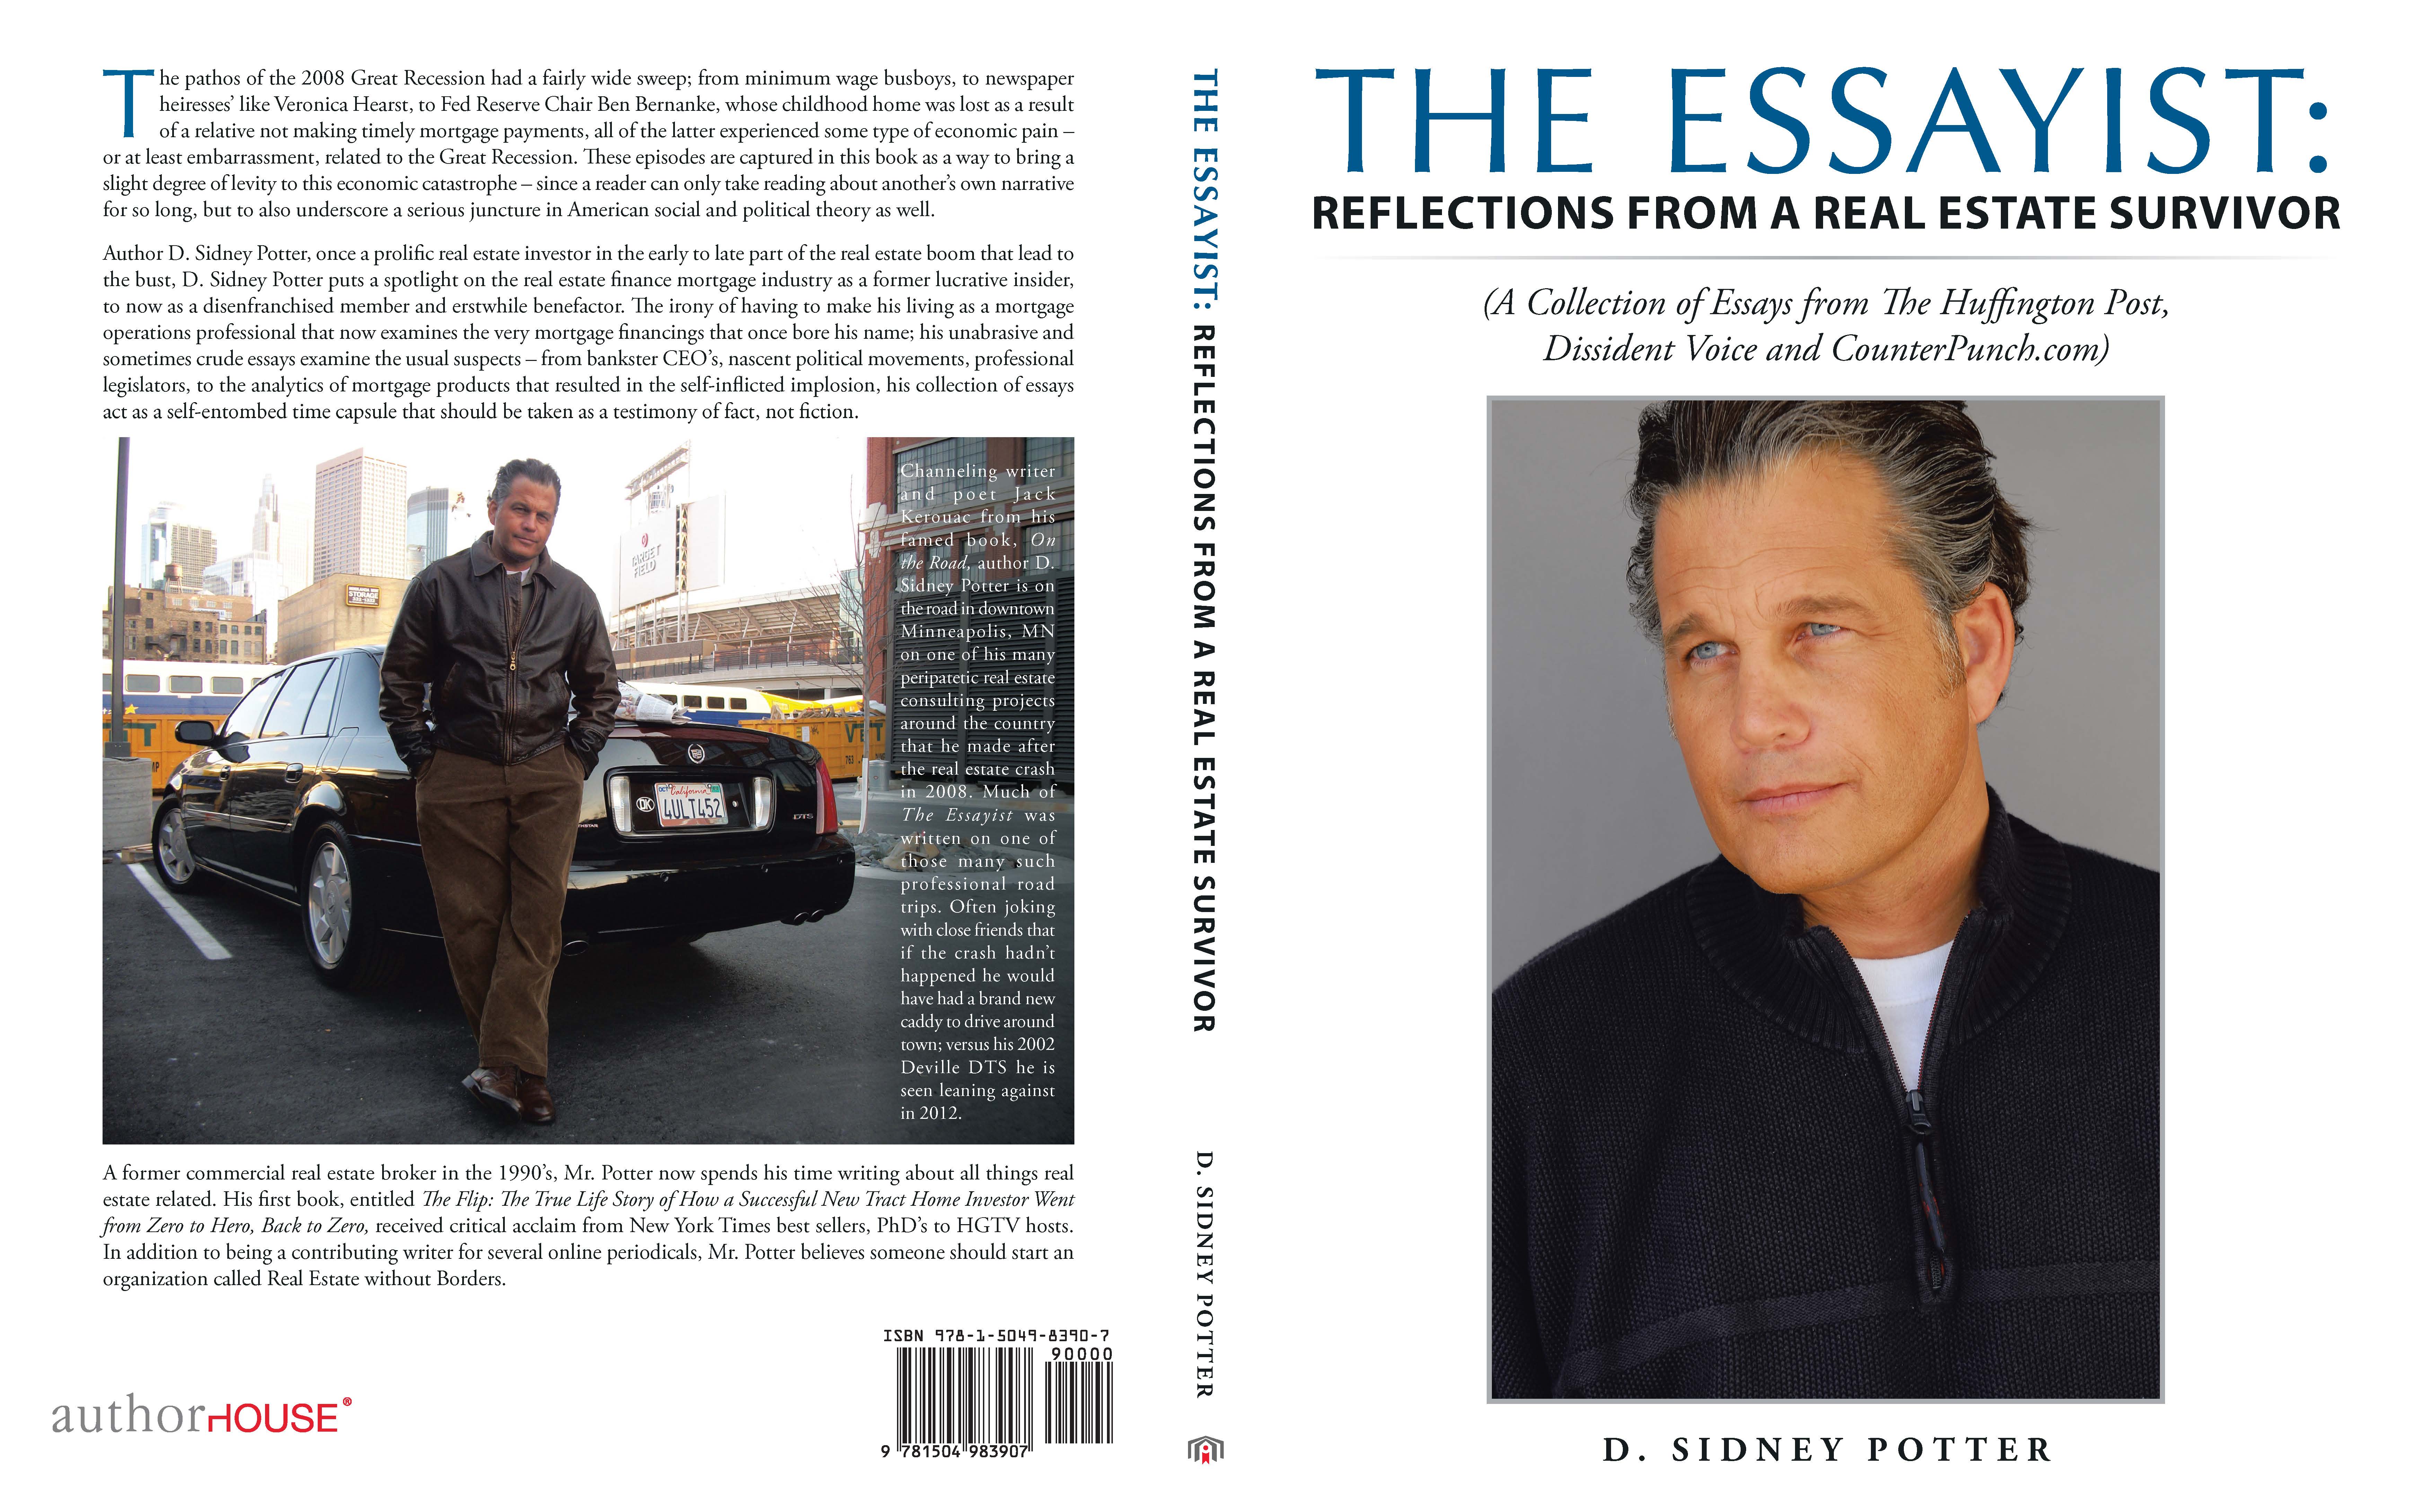 FREE: The Essayist: Reflections from a Real Estate Survivor: (A Collection of Essays from The Huffington Post, Dissident Voice and CounterPunch.com) by D. Sidney Potter